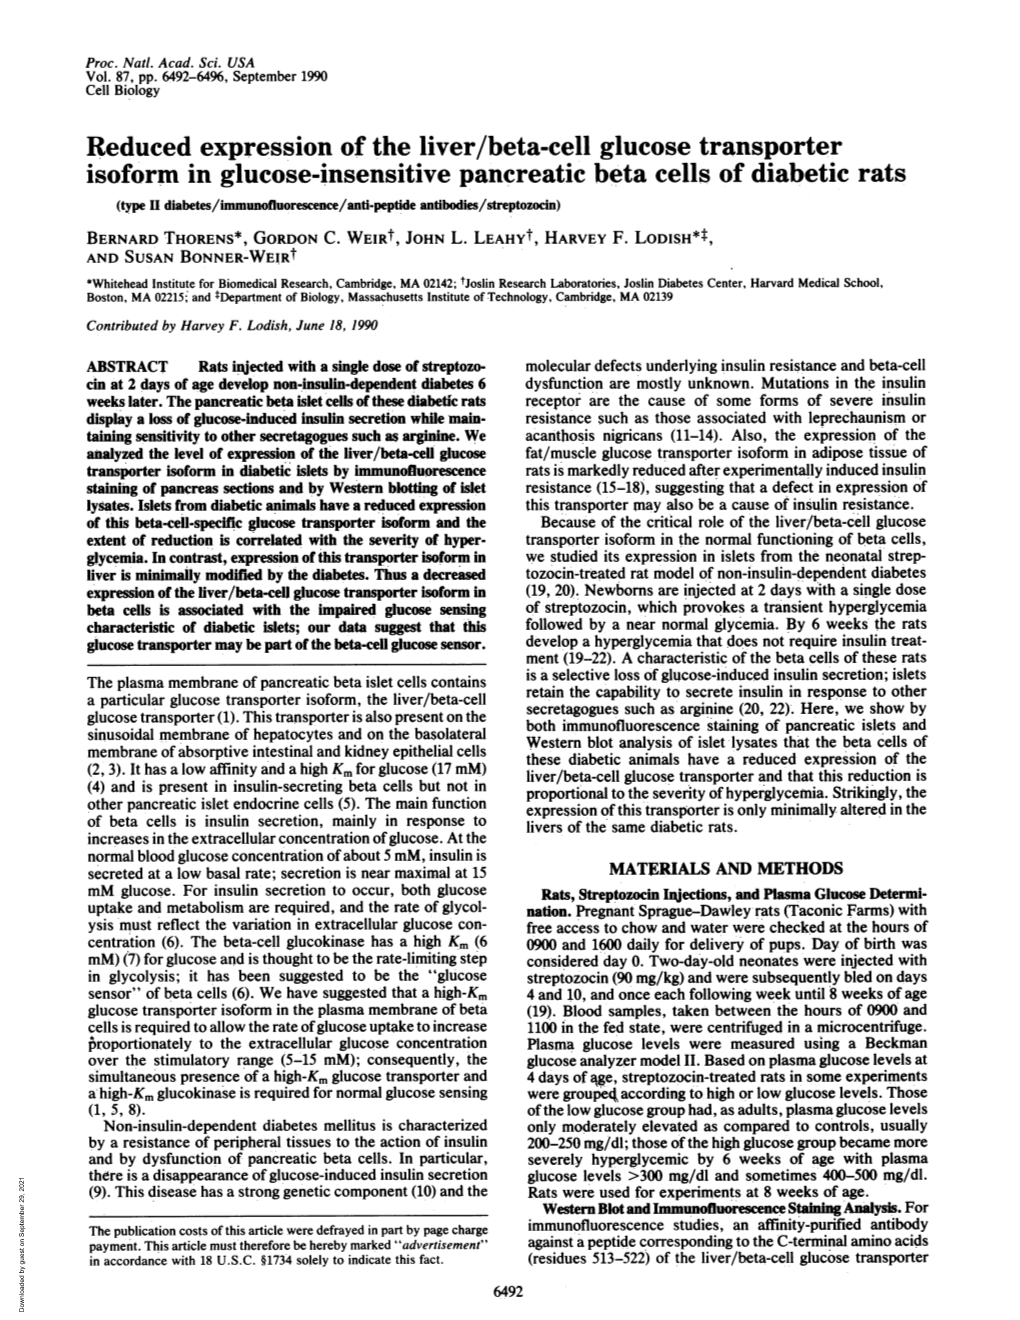 Reduced Expression of the Liver/Beta-Cell Glucose Transporter